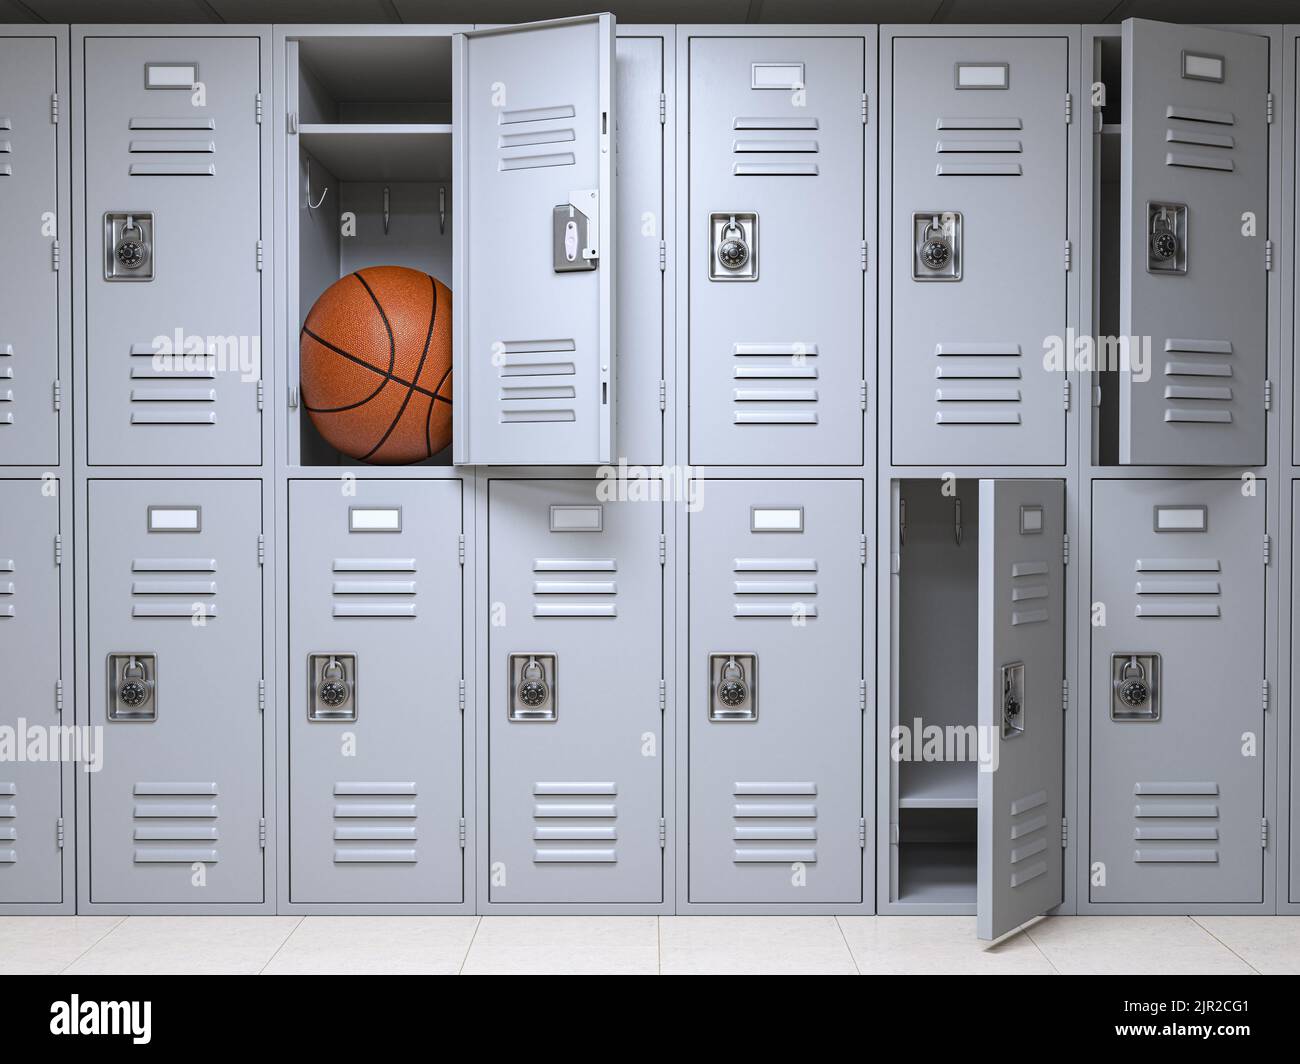 School or gym locker room with small lockers box insuficient for basketball ball. 3d illustration Stock Photo